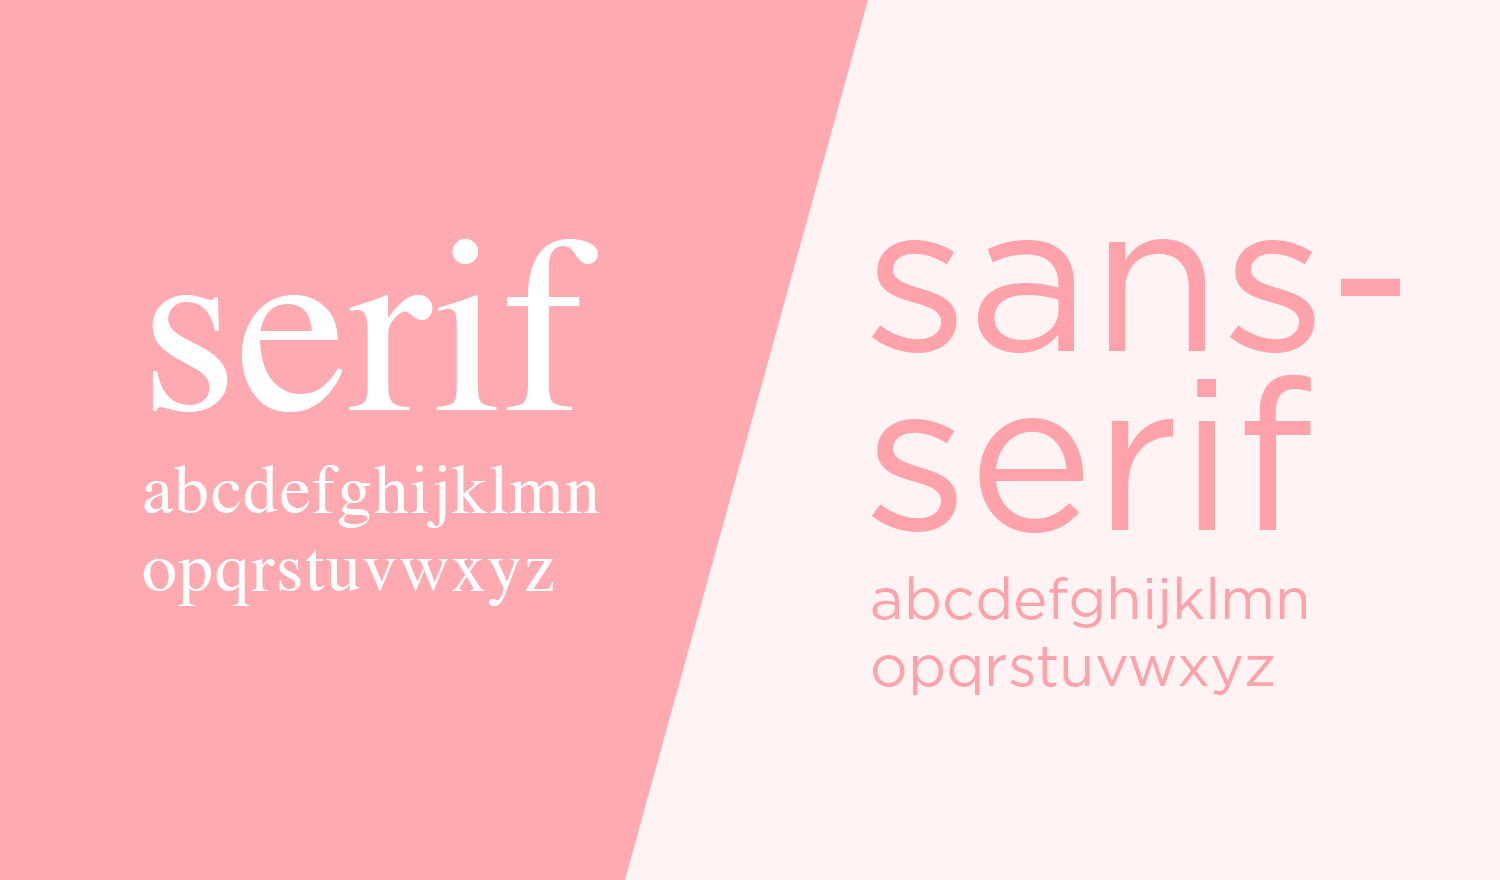 Serif and sans-serif are the two main distinctions